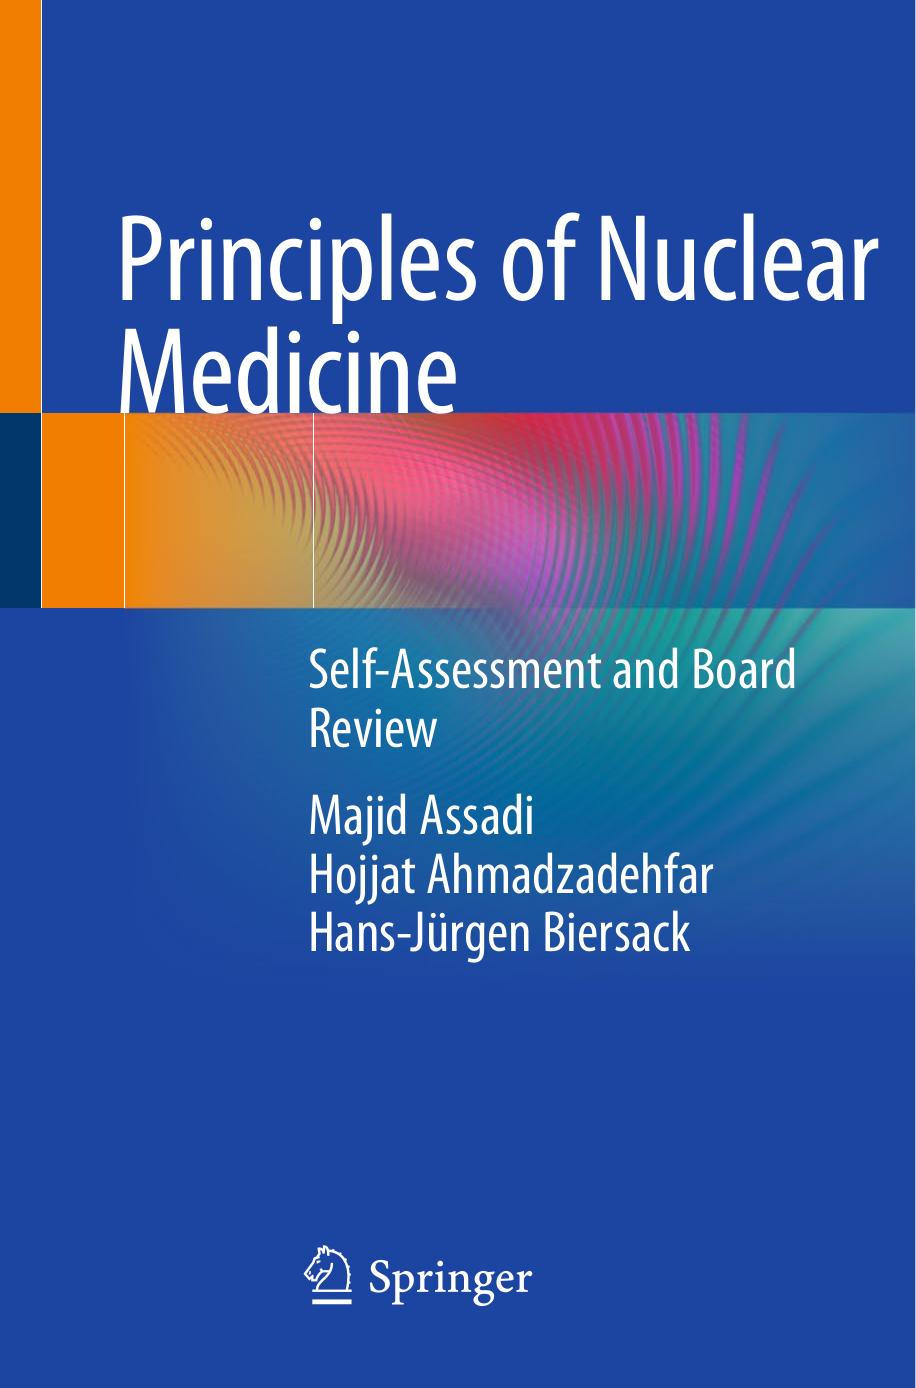 Principles of Nuclear Medicine Self-Assessment and Board Review 2018